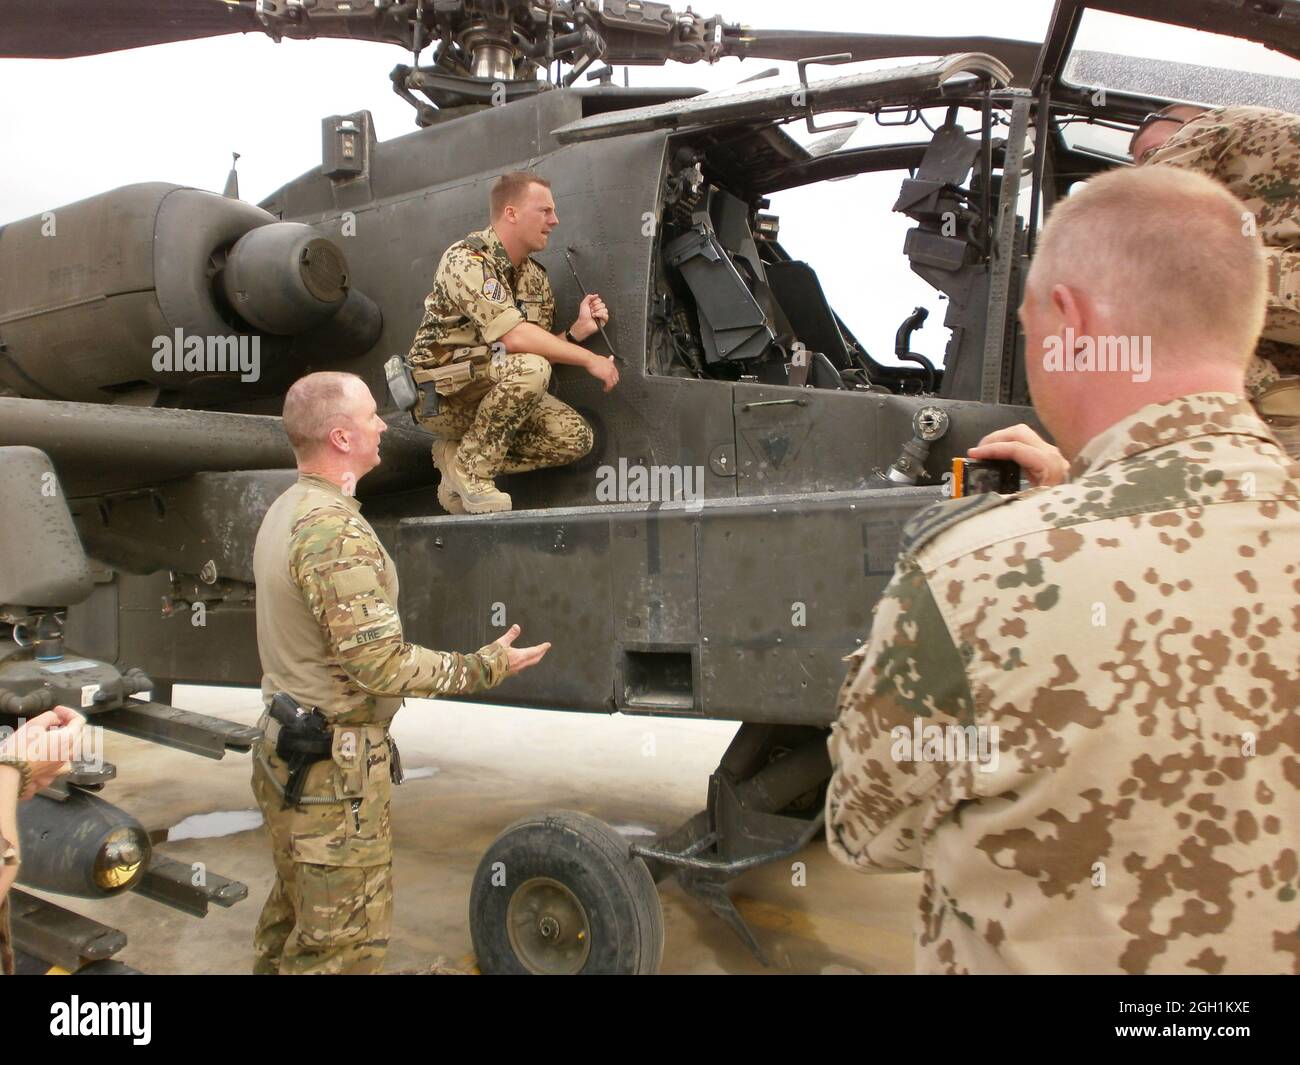 CW4 Ryan Eyre gives a tour and discusses capabilities of the AH-64D Longbow with German and Swedish Air Traffic Control soldiers after a mission.  (Photo by Maj. John C. Crotzer) Stock Photo